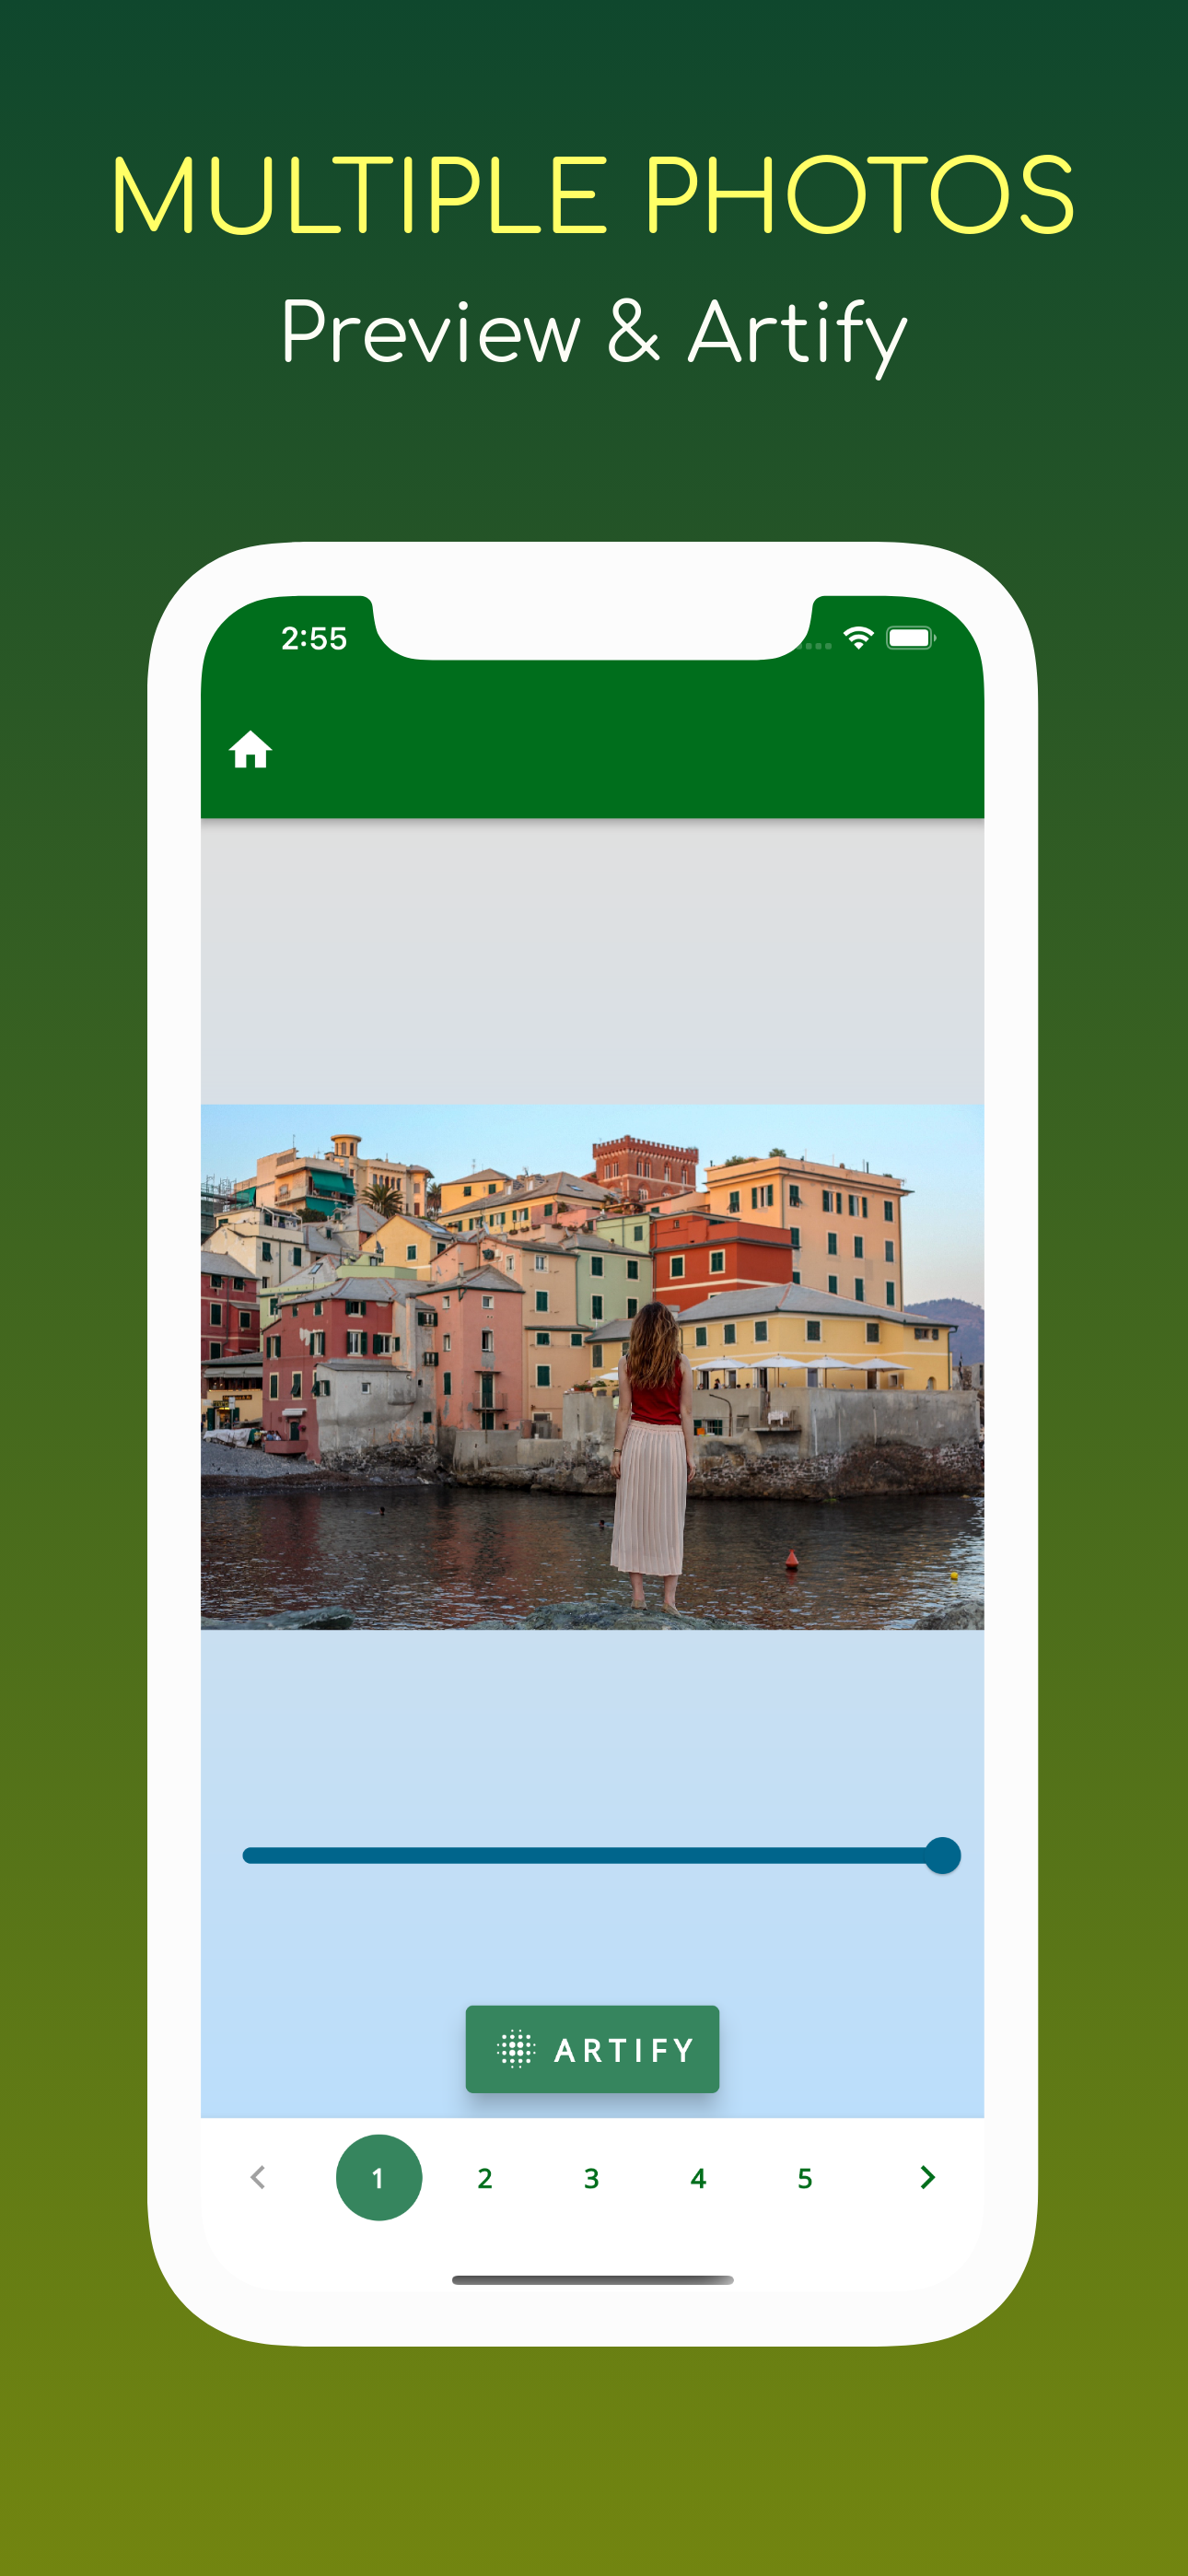 Multiple Photos Mode - Preview & Artify